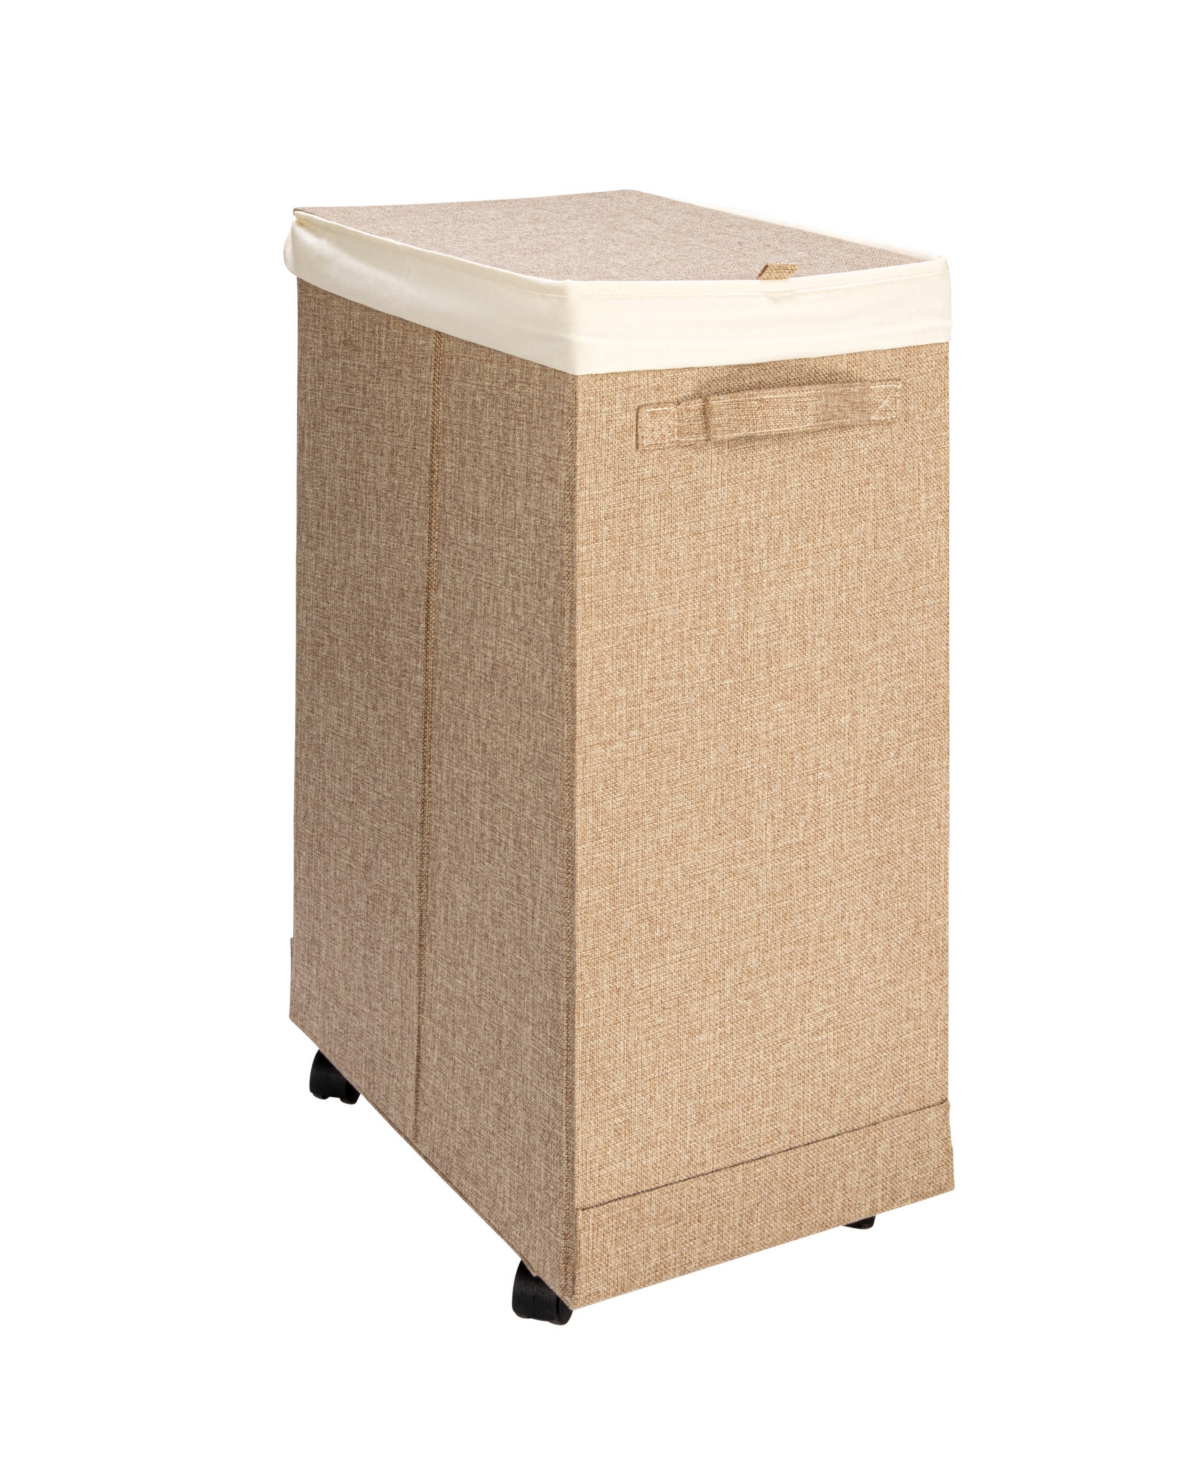 Household Essentials Narrow Collapsible Laundry Hamper With Liner And Lid In Latte